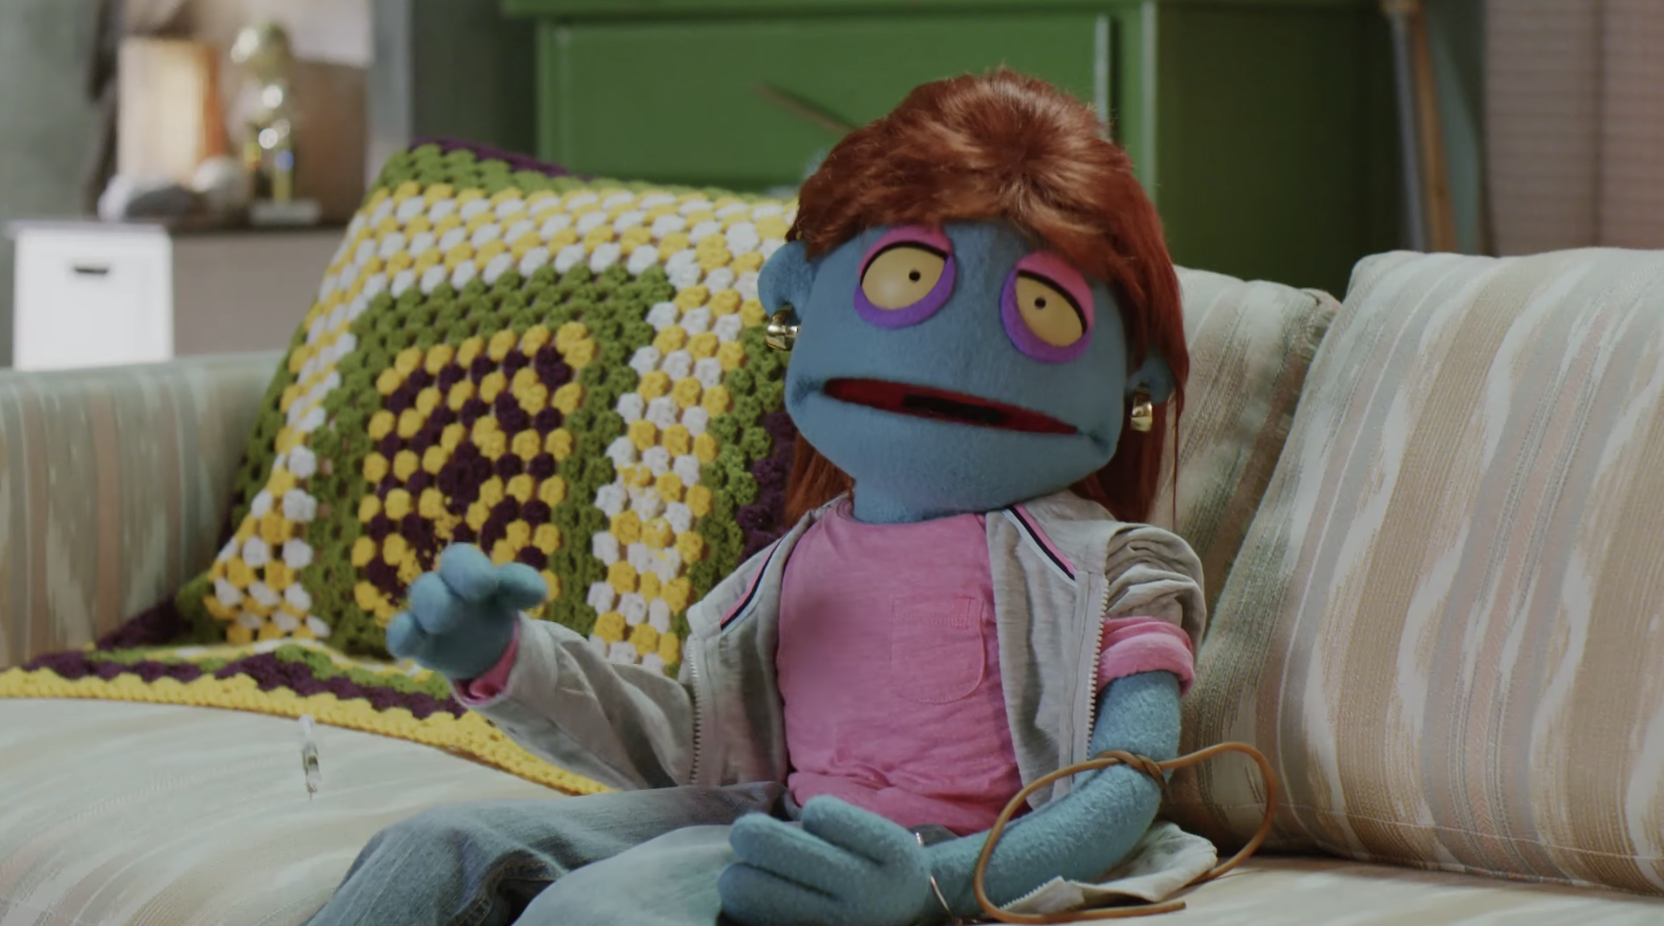 New Campaign Uses Puppets To Teach About Addiction